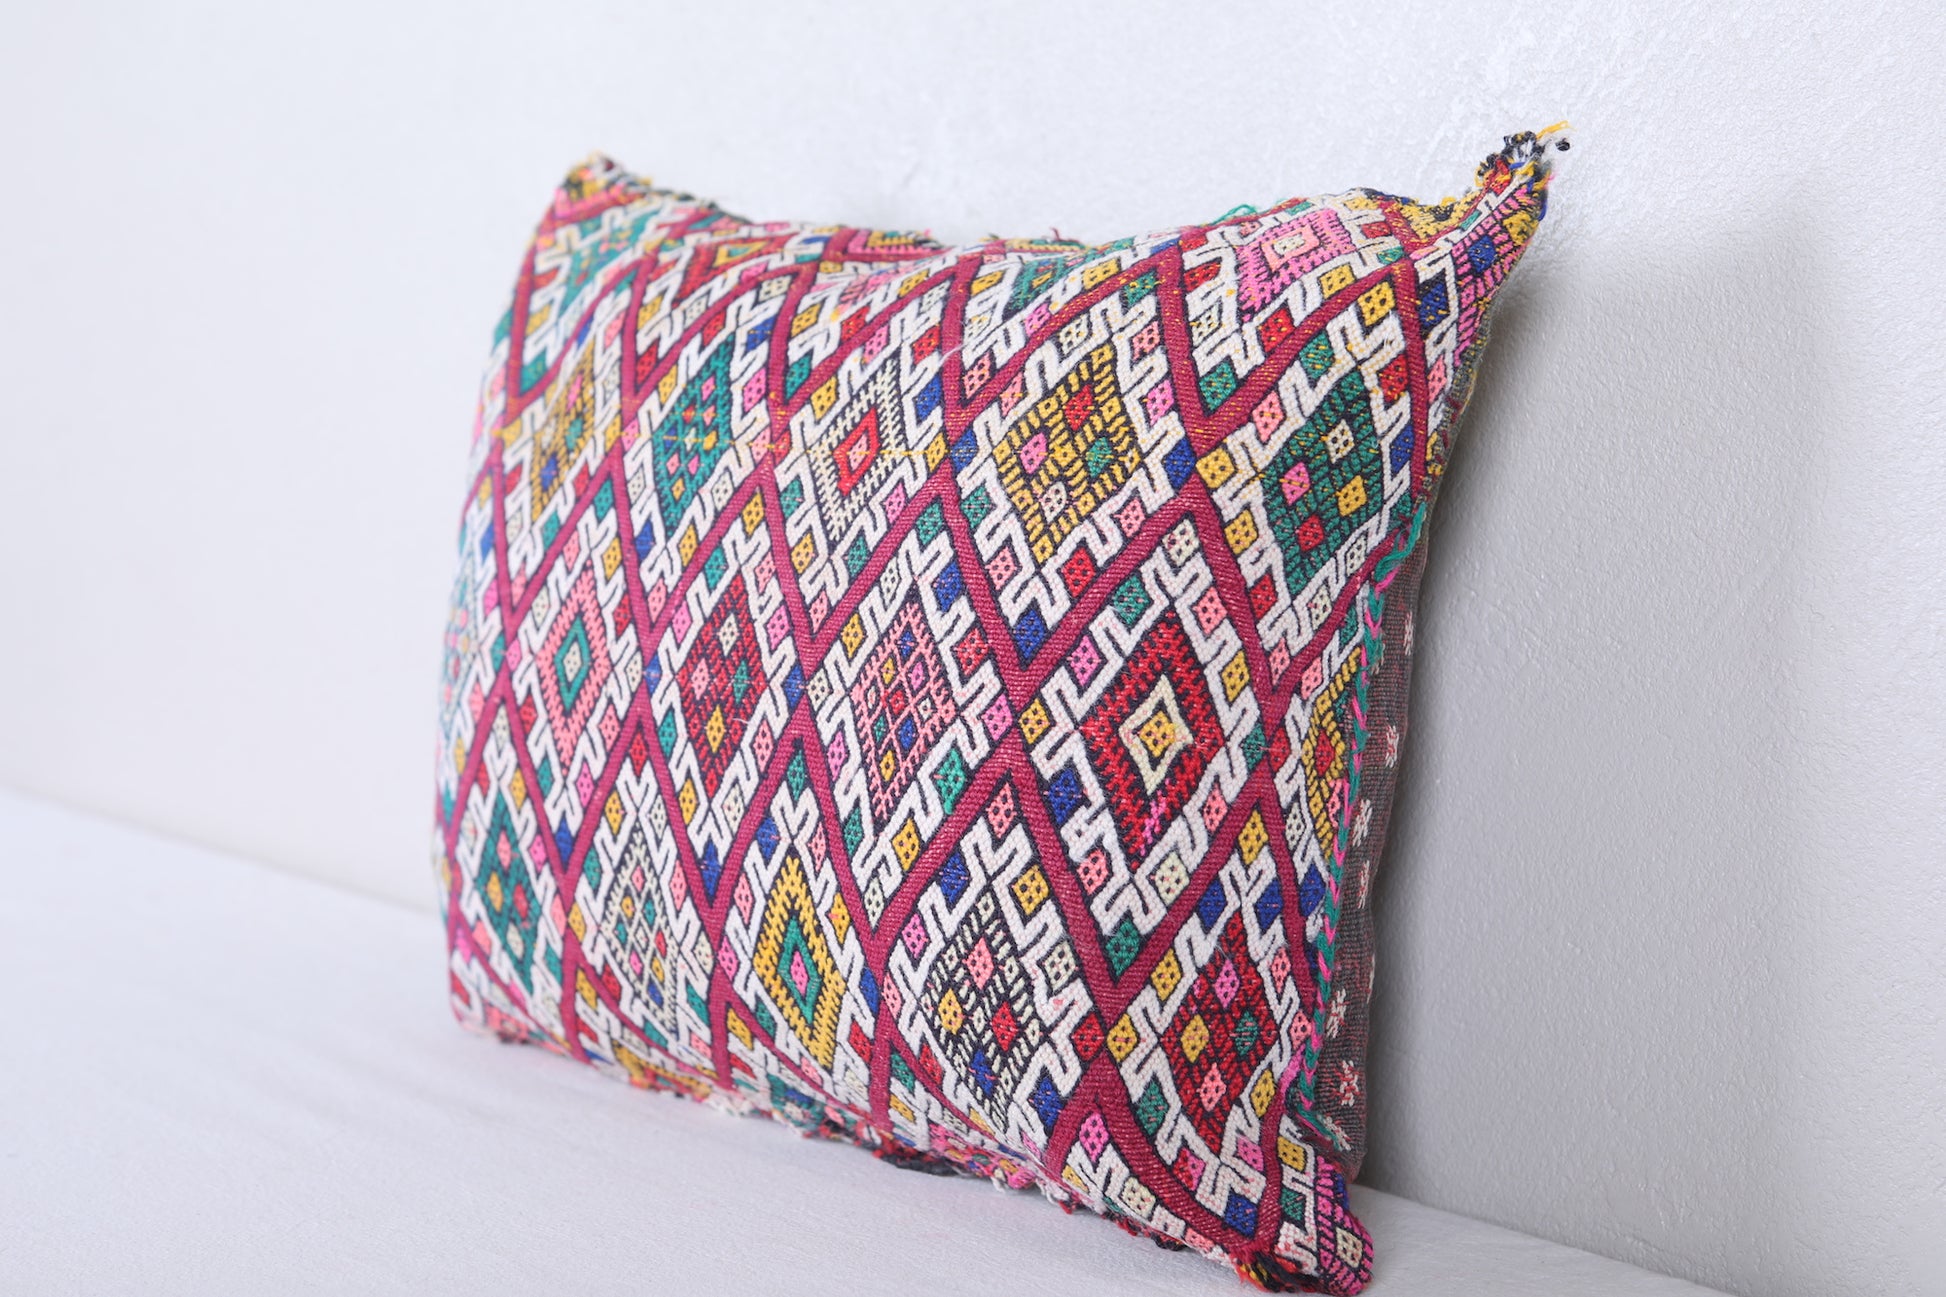 Vintage moroccan handwoven kilim pillow 12.5 INCHES X 15.7 INCHES